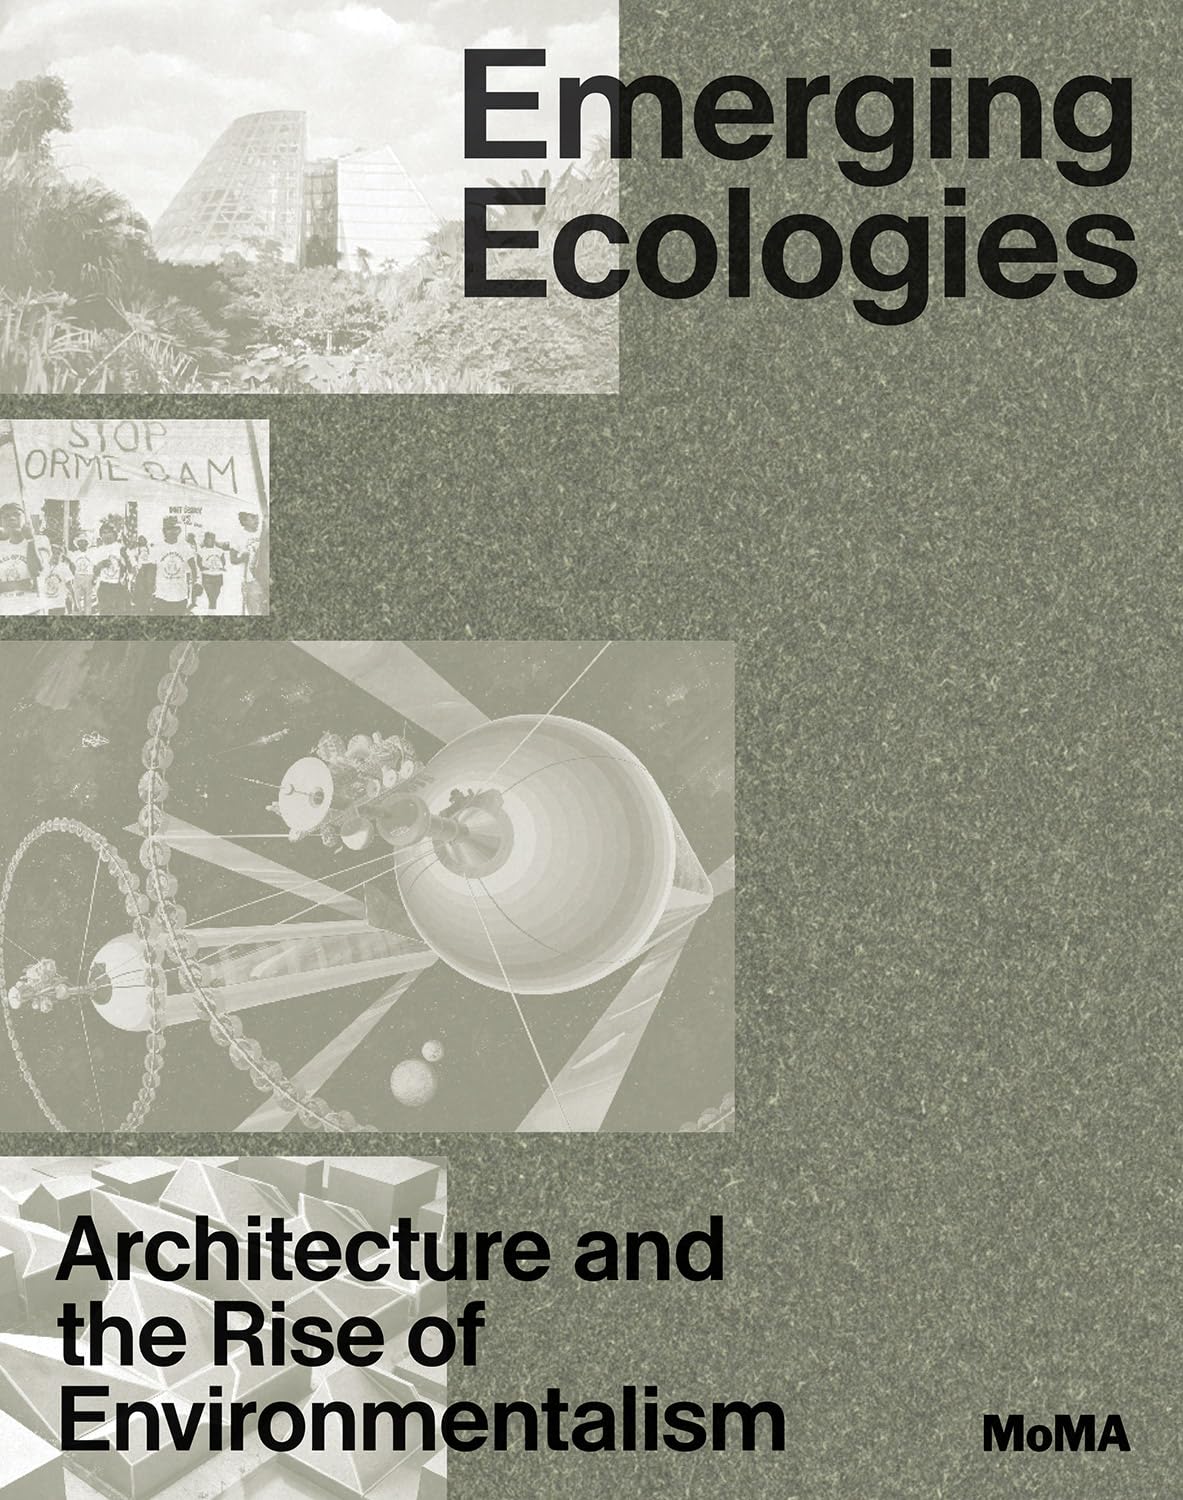 EMERGING ECOLOGIES: ARCHITECTURE AND THE RISE OF ENVIRONMENTALISM: A FIELD GUIDE